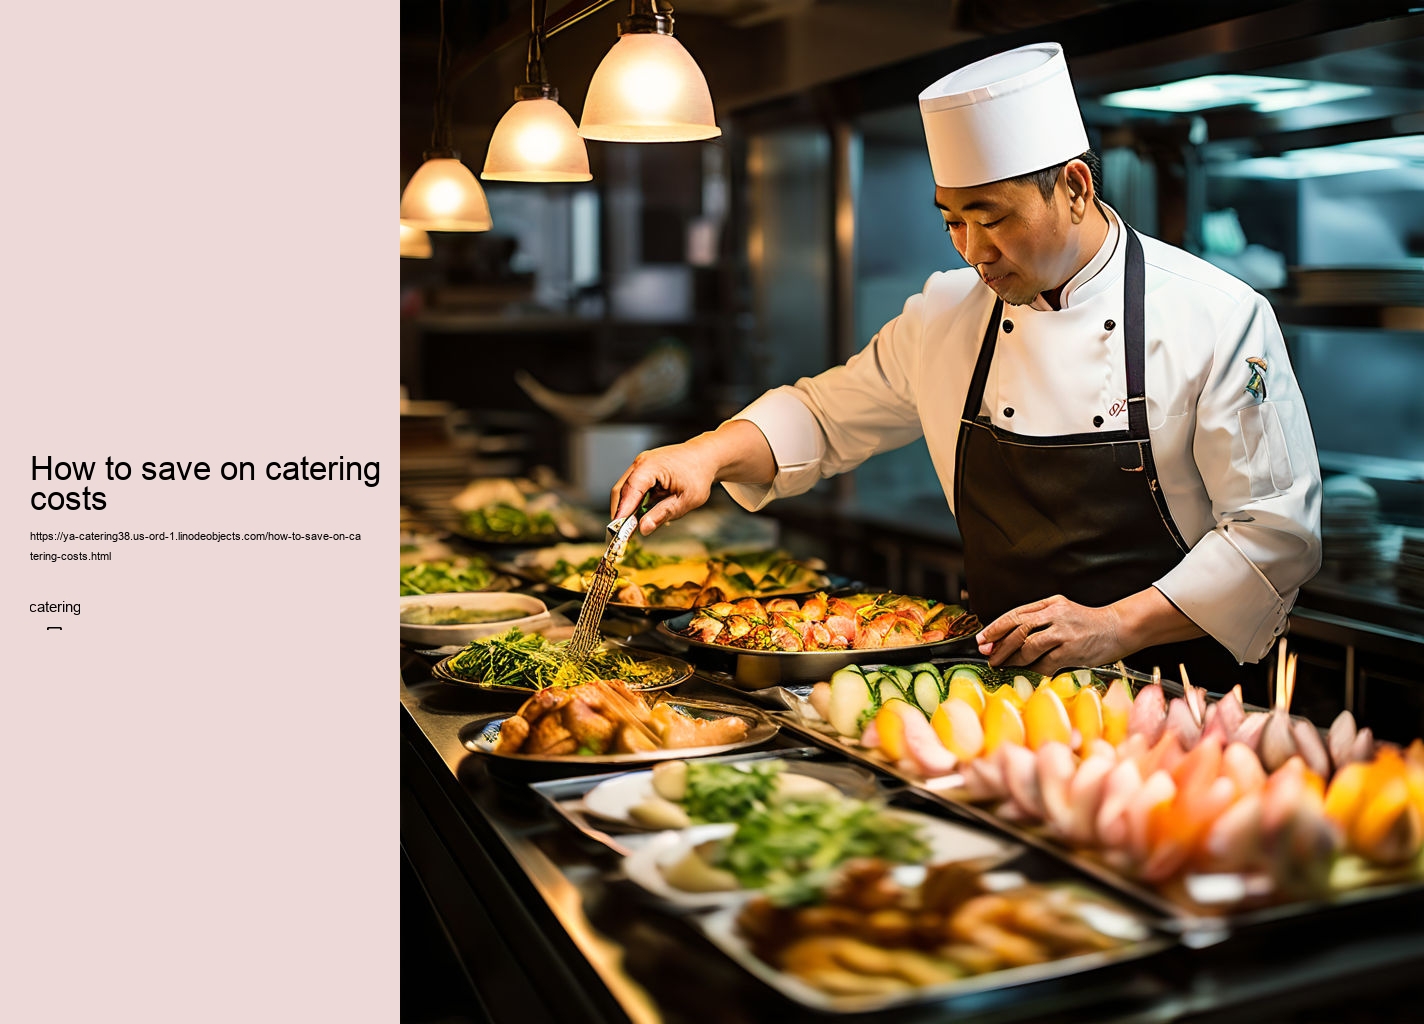 How to save on catering costs